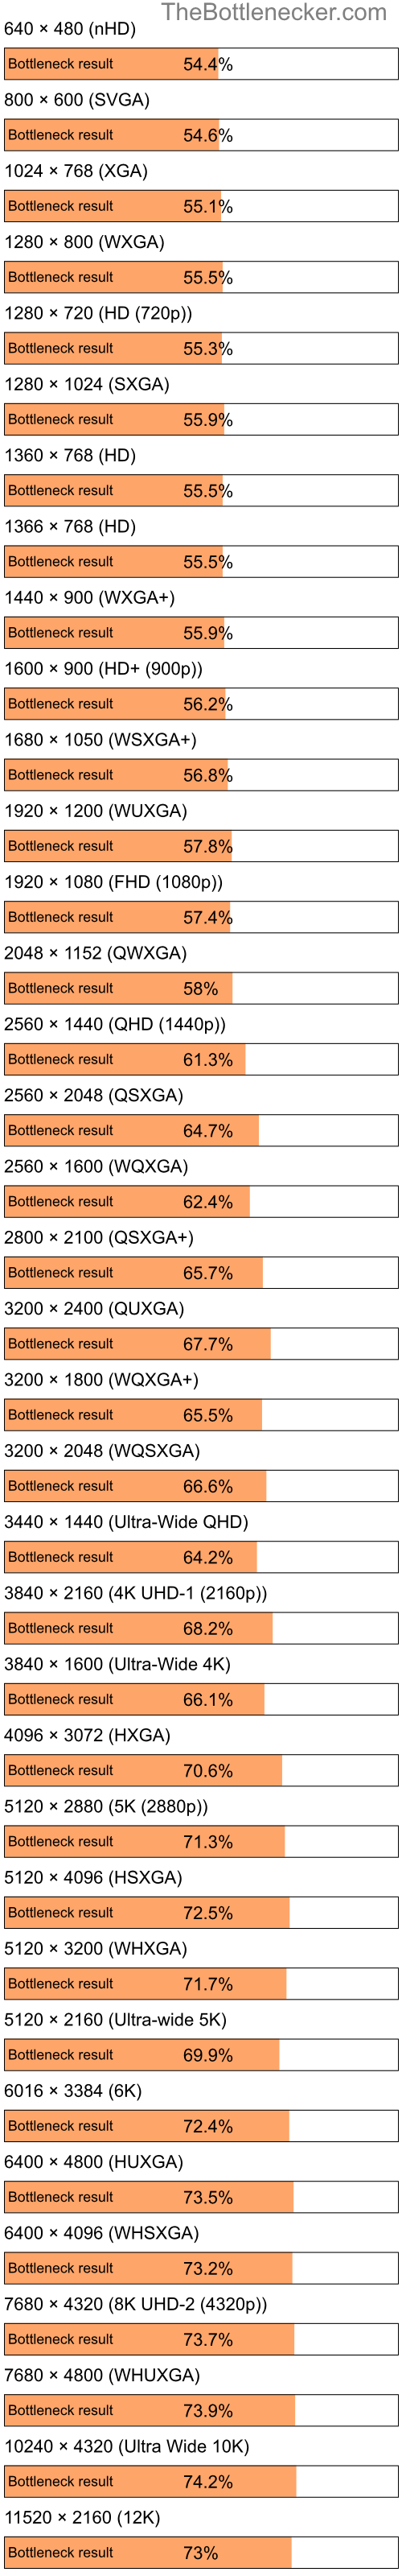 Bottleneck results by resolution for Intel Celeron M and AMD Mobility Radeon HD 4200 in Processor Intense Tasks